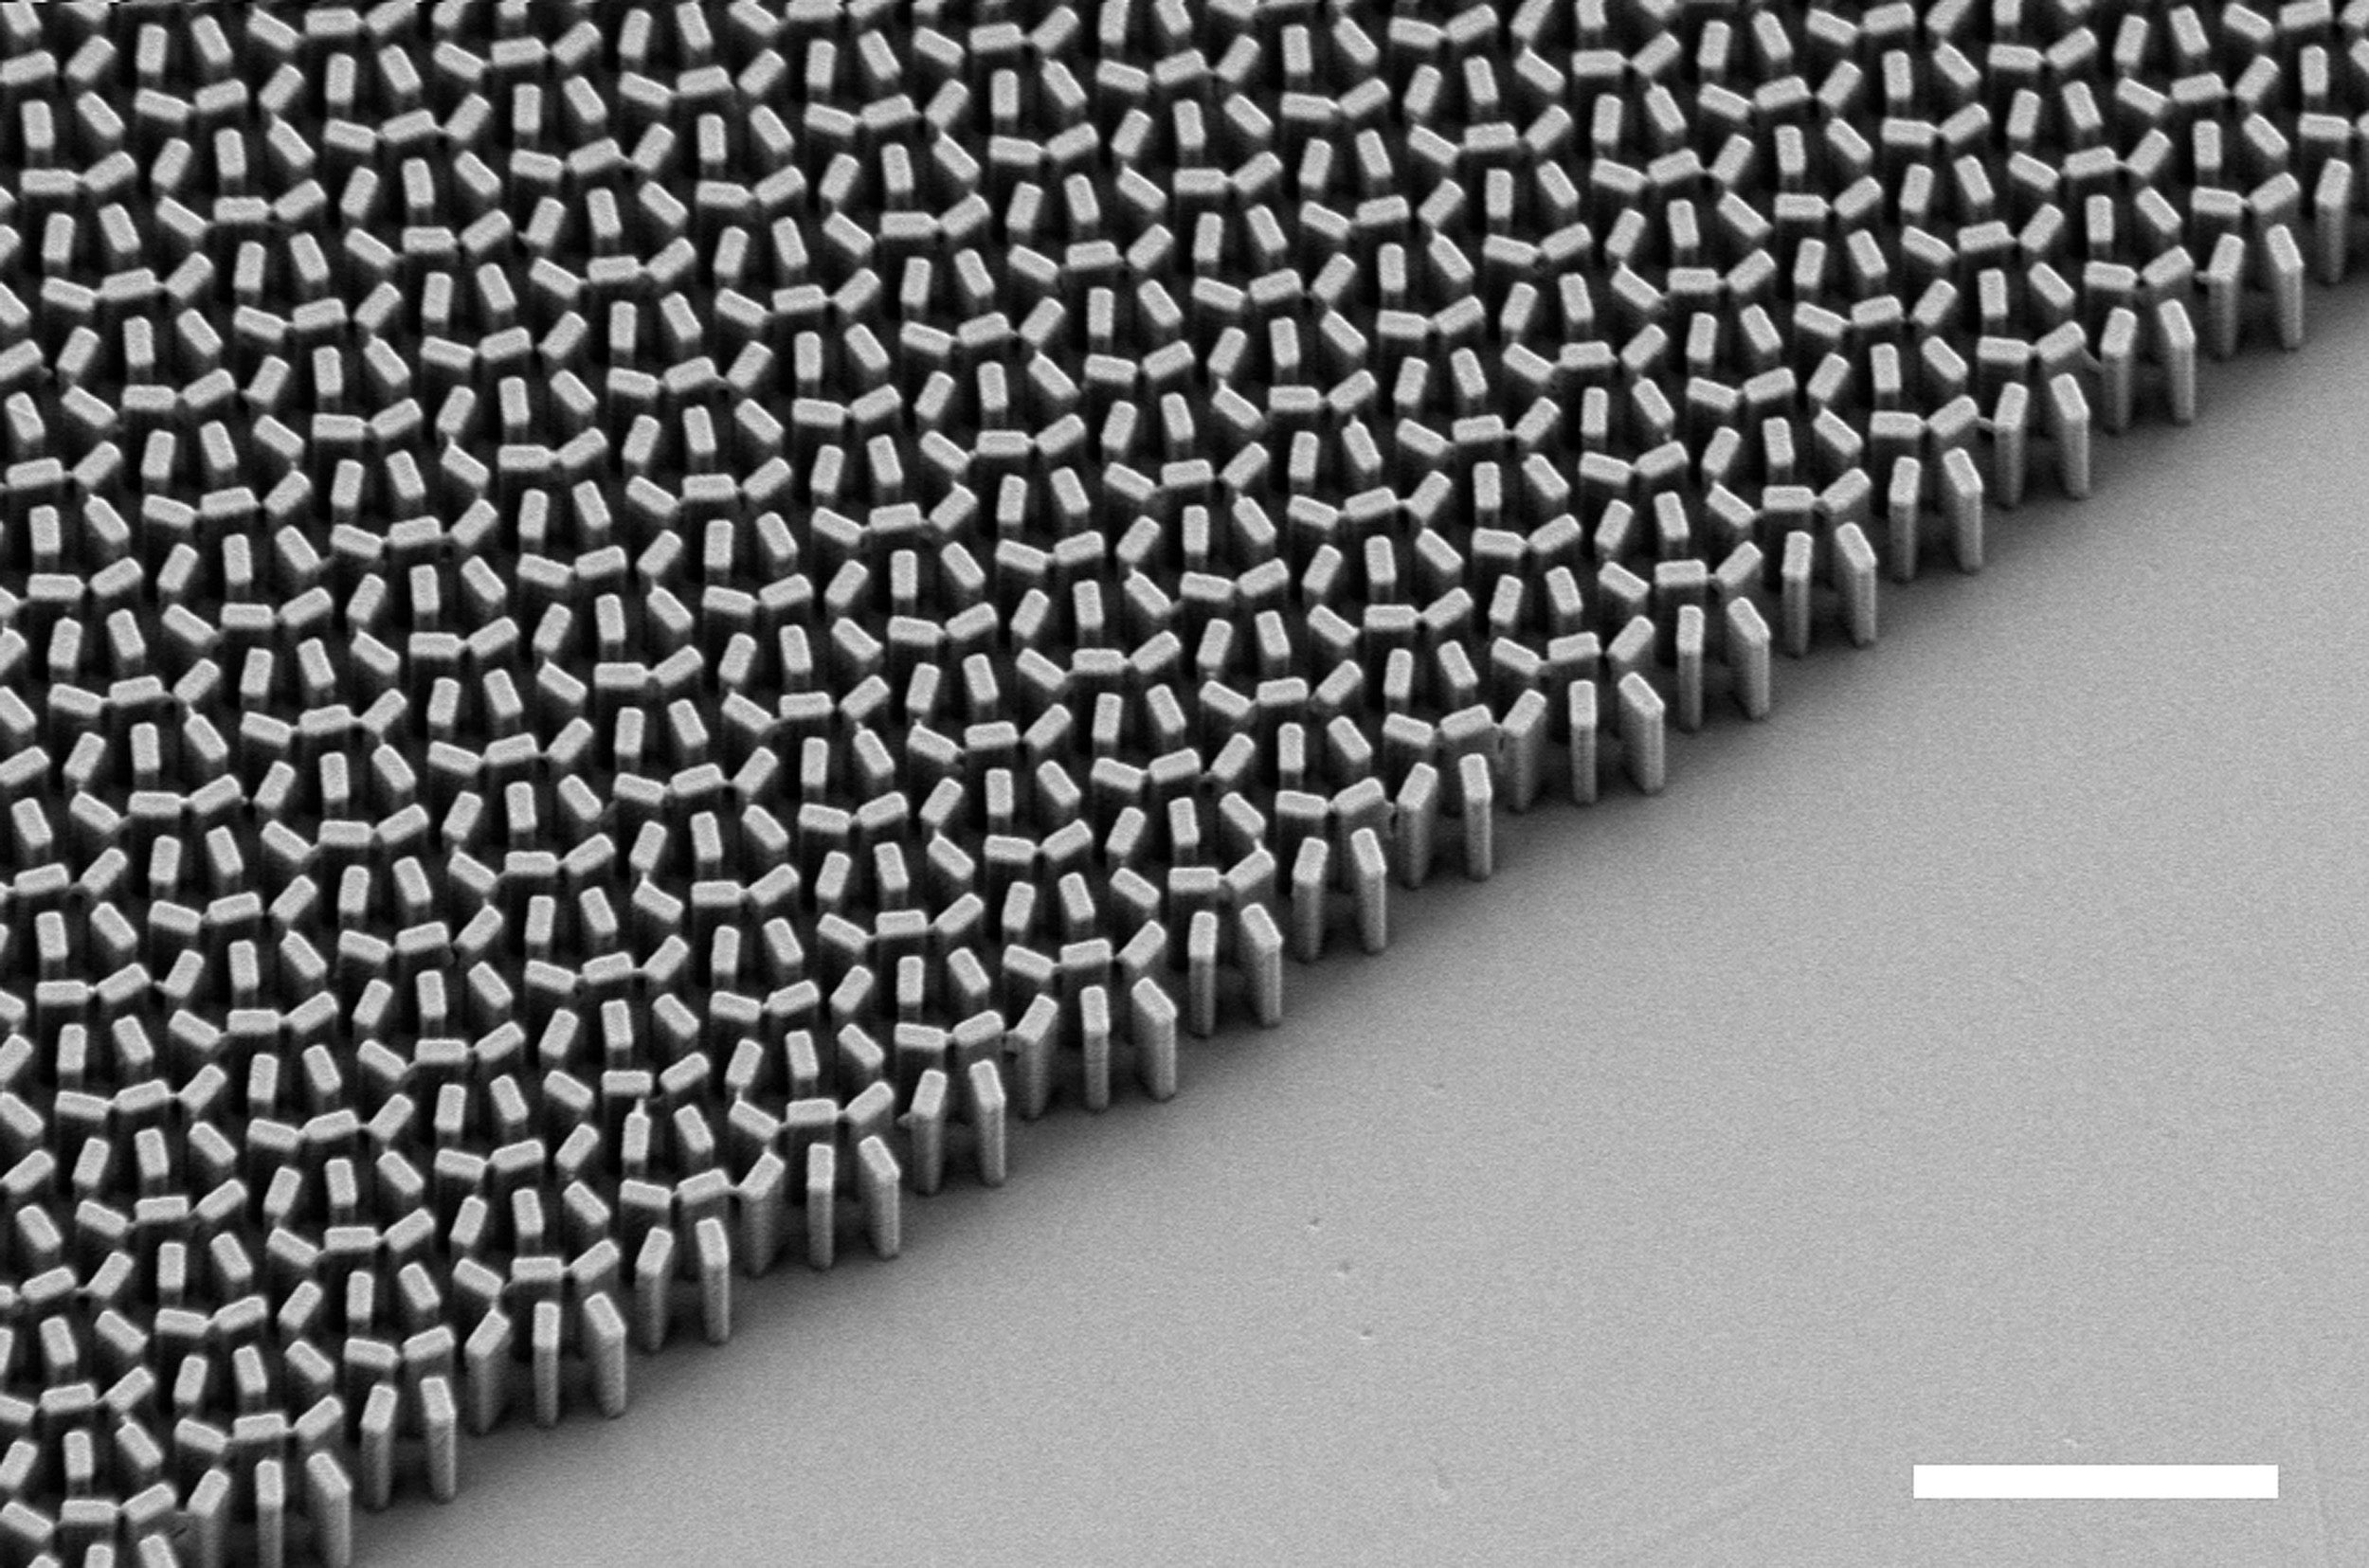 Scanning electron microscope micrograph of a metalens .